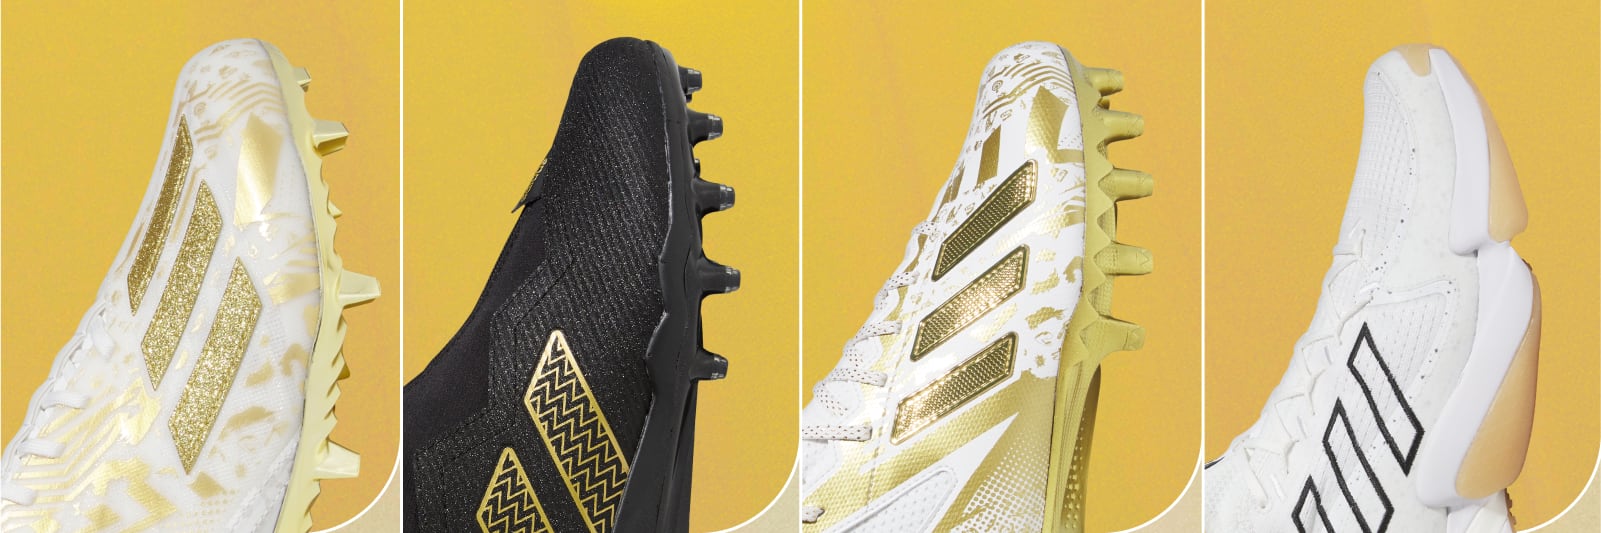 WHAT WILL FOOTBALL BOOTS LOOK LIKE IN 20 YEARS TIME ?